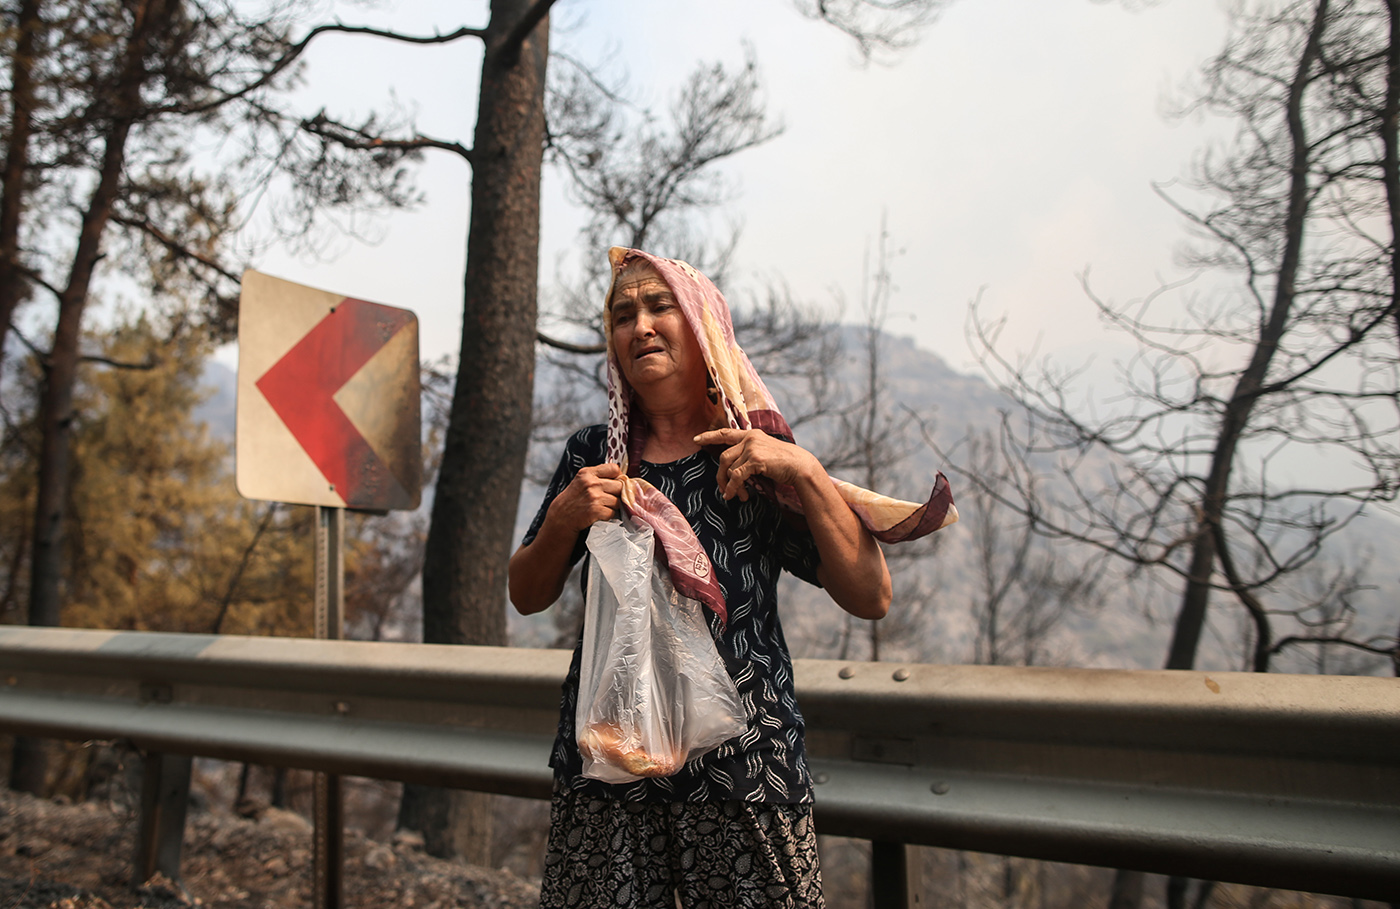 An old woman reacts as she evacuating her animals at the burned landed to a safe place due to wildfires at the Cokertme village of Milas district of Mugla, Turkey, 02 August 2021. Turkish Health minister Fahrettin Koca confirmed that eight people have lost their lives due to the wildfires raging in Turkey’s Mediterranean towns.